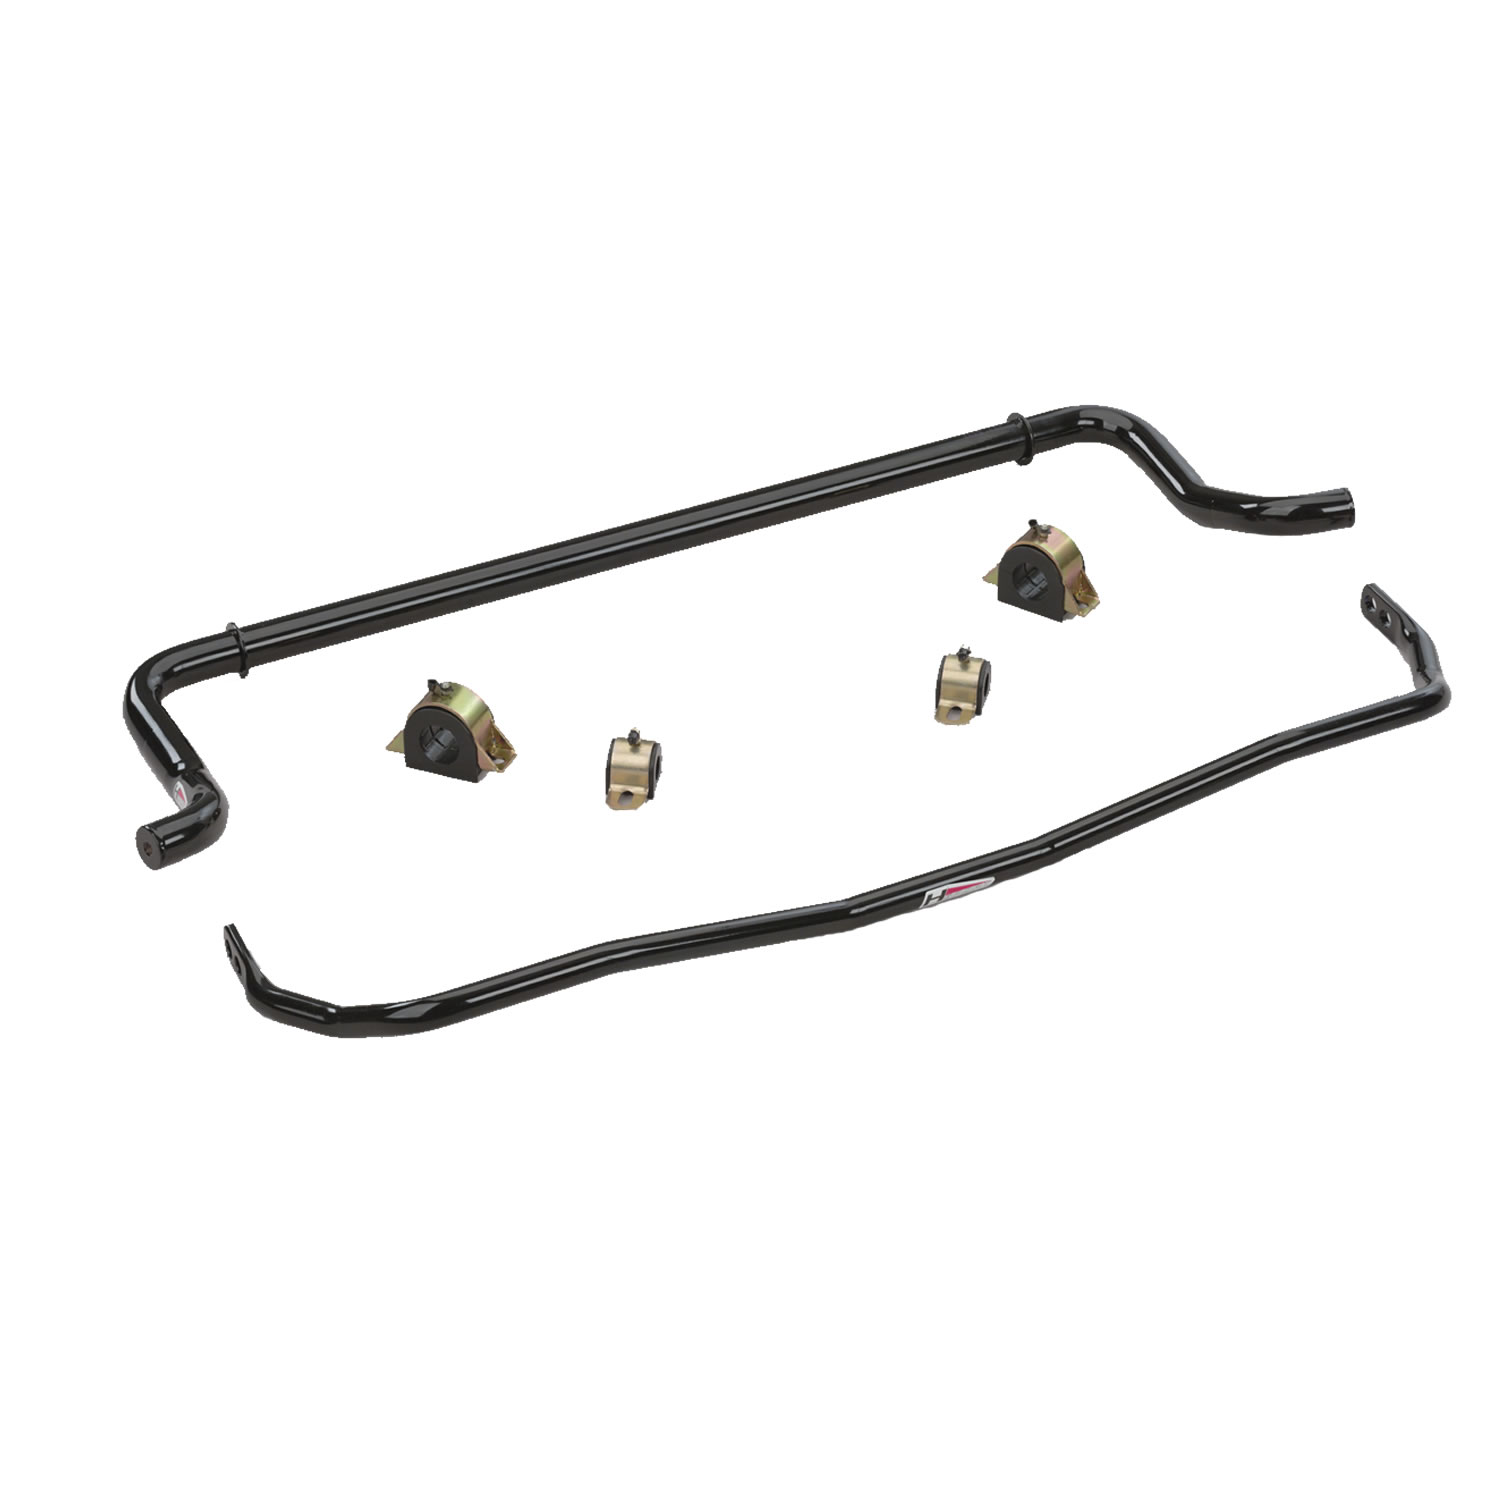 **SALE**2007-2008 Audi B7 RS4 Sport Sway Bars from Hotchkis Sport Suspension